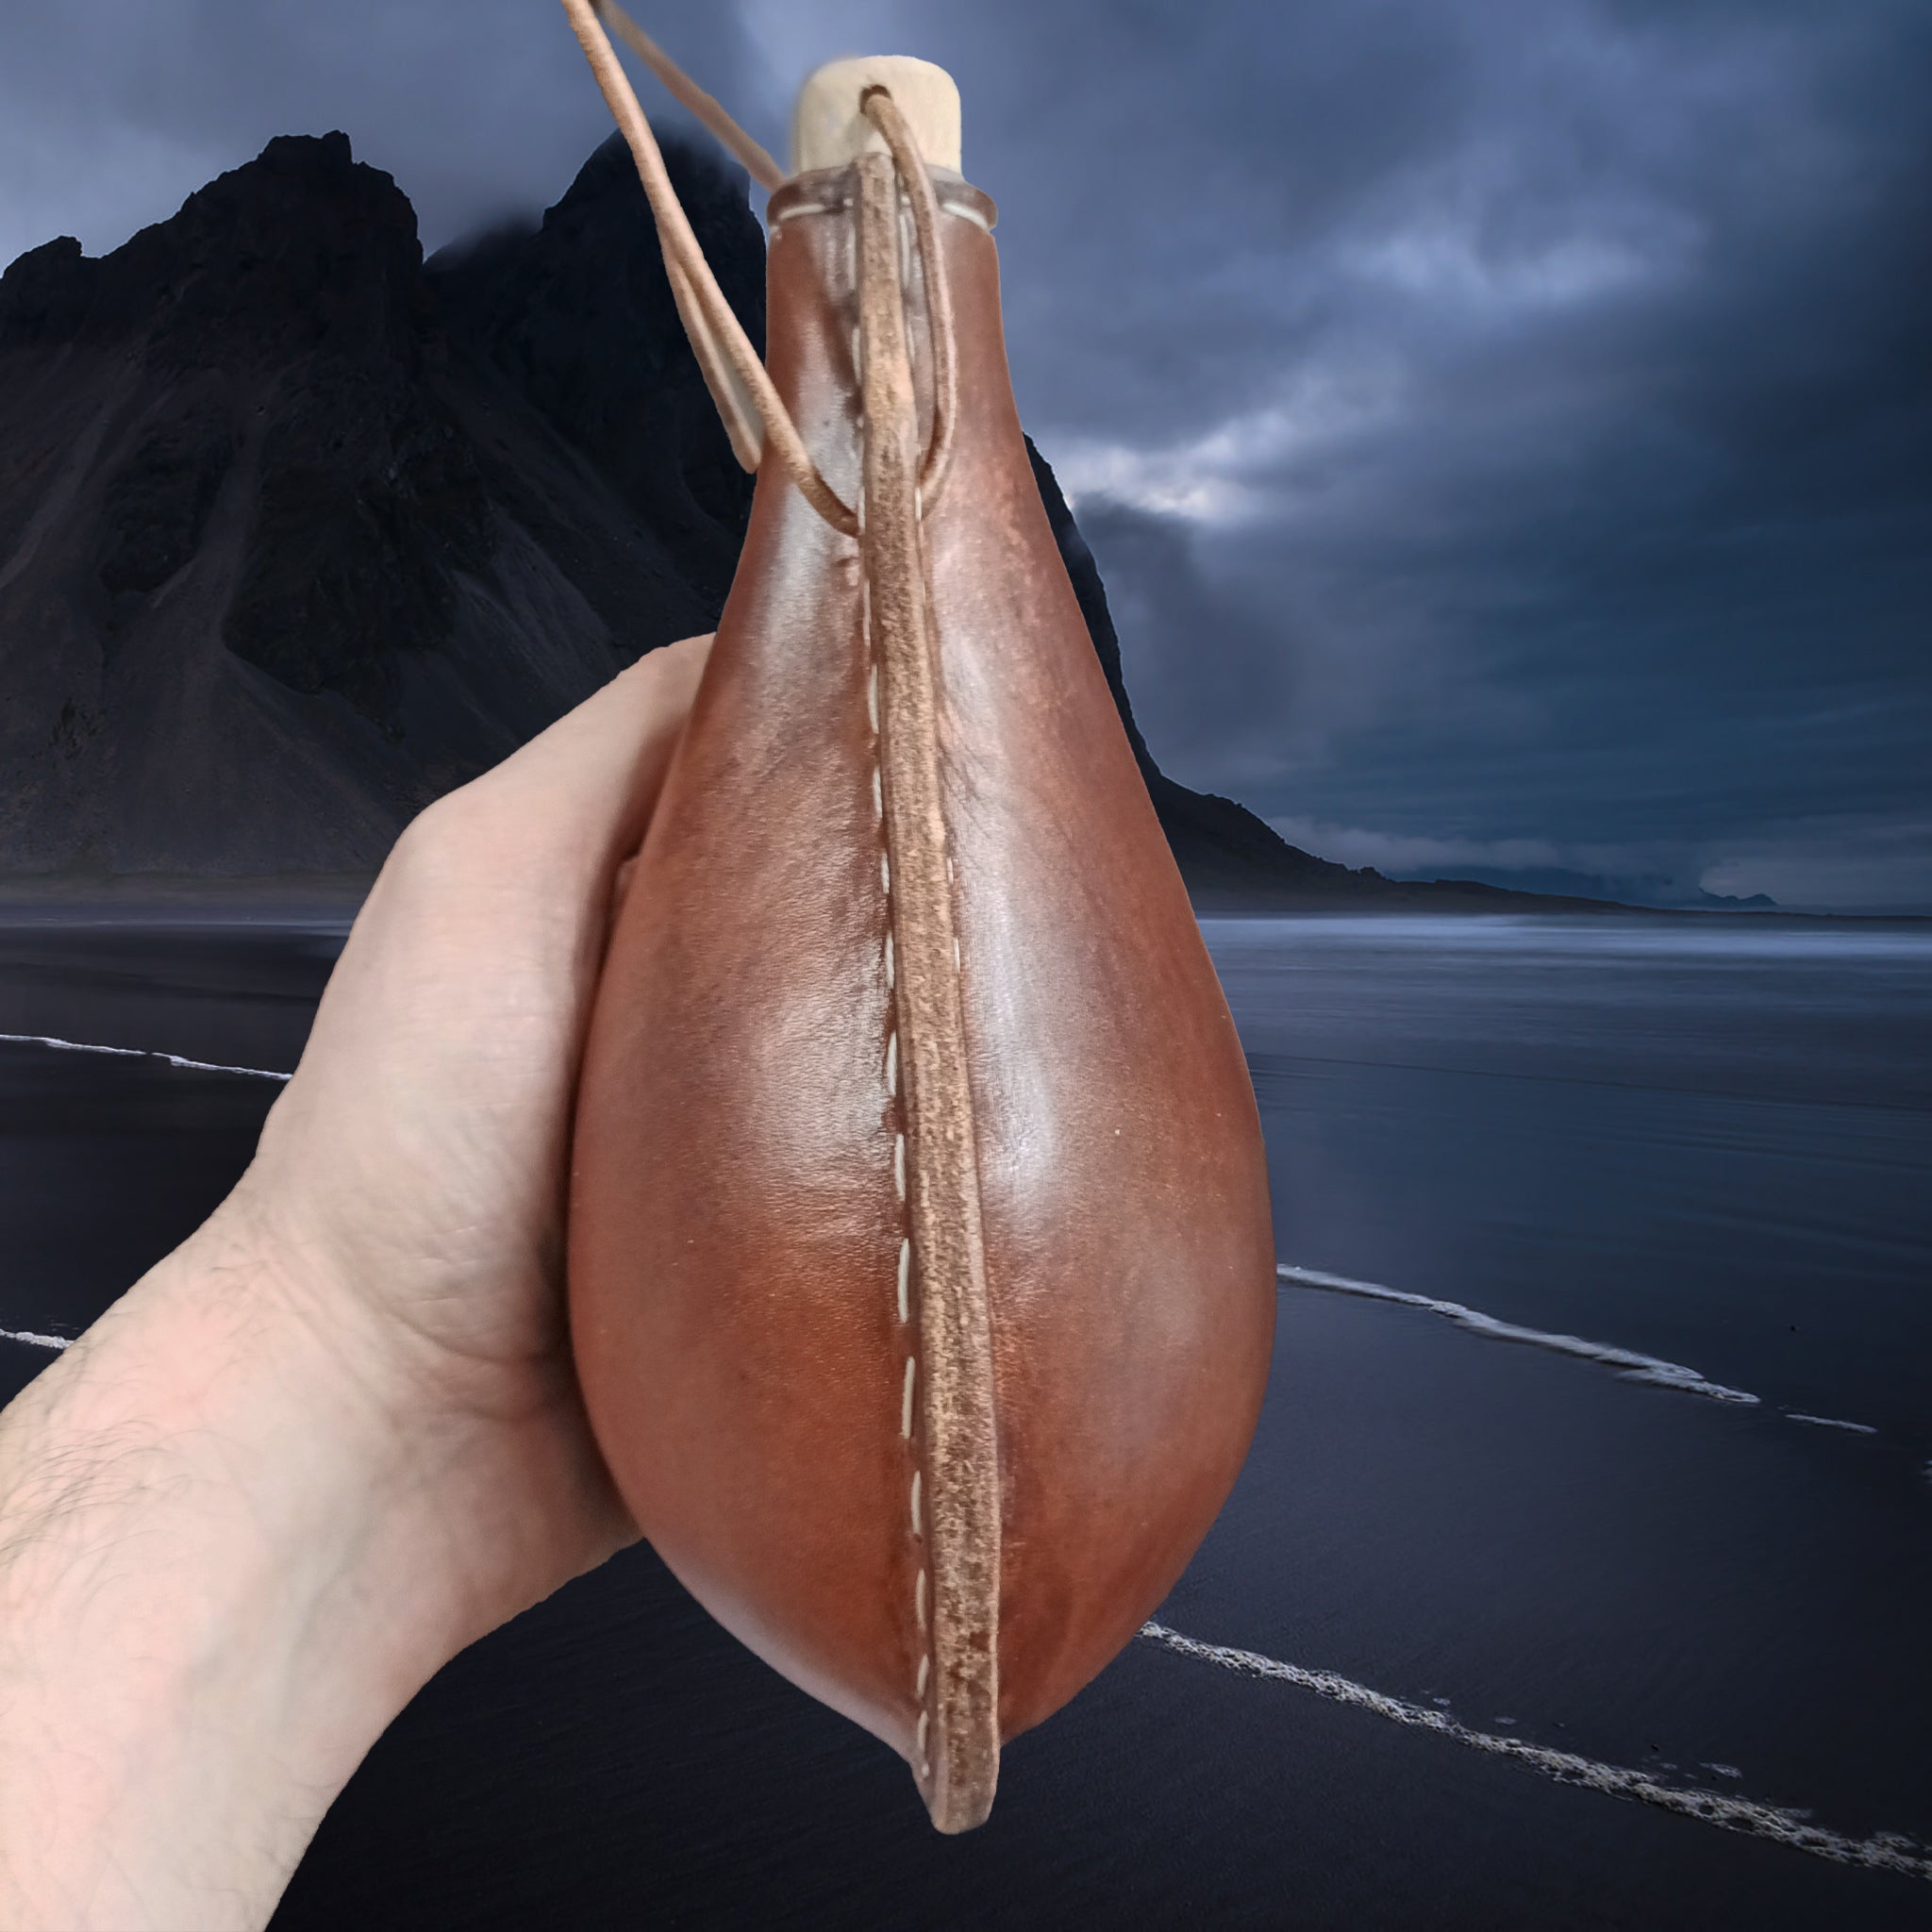 Handmade Thick Boiled Leather Water Bottle with Wood Stopper & Leather Thong Strap in Hand - Side View